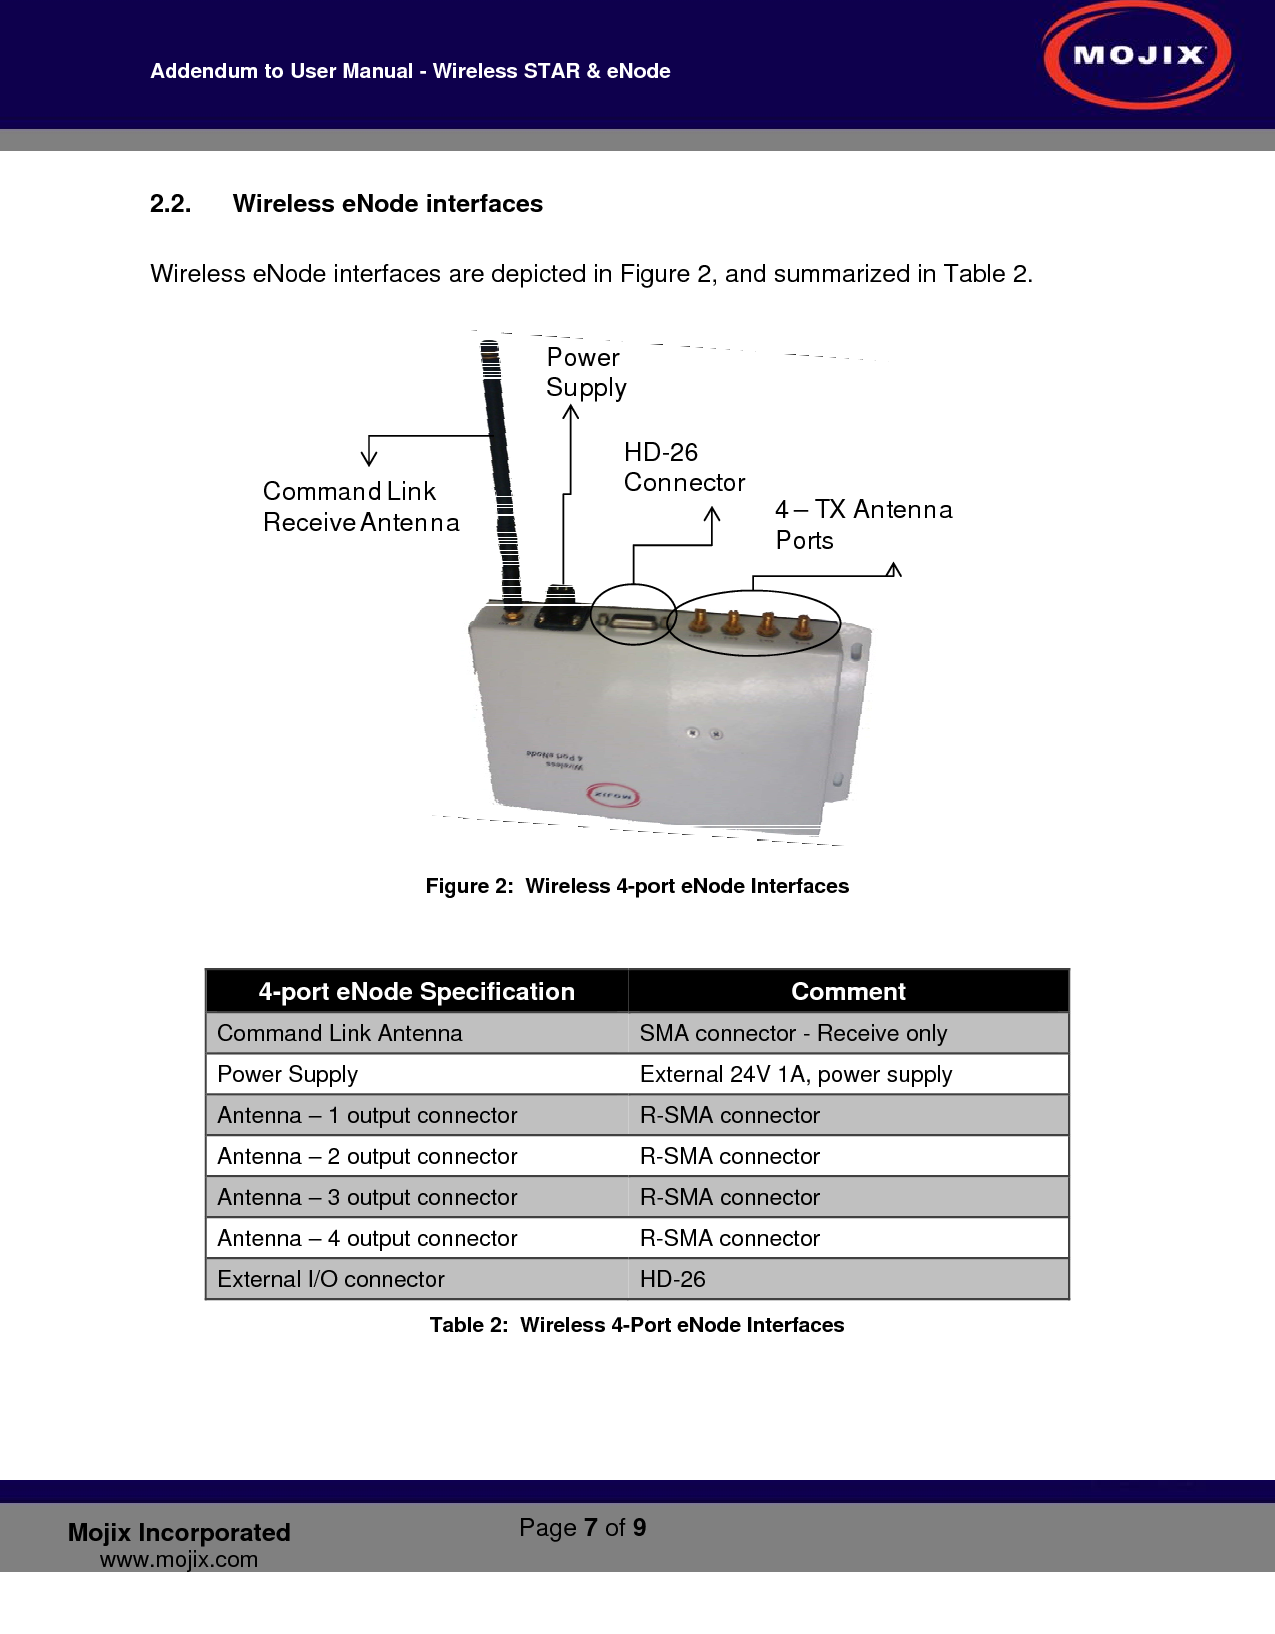 Addendum to User Manual - Wireless STAR &amp; eNode        Page 7 of 9   Mojix Incorporated www.mojix.com 2.2.  Wireless eNode interfaces  Wireless eNode interfaces are depicted in Figure 2, and summarized in Table 2.  4 – TX AntennaPortsHD-26 ConnectorPower SupplyCommand Link  Receive Antenna Figure 2:  Wireless 4-port eNode Interfaces   4-port eNode Specification  Comment Command Link Antenna  SMA connector - Receive only Power Supply   External 24V 1A, power supply Antenna – 1 output connector  R-SMA connector Antenna – 2 output connector  R-SMA connector Antenna – 3 output connector  R-SMA connector Antenna – 4 output connector  R-SMA connector External I/O connector   HD-26 Table 2:  Wireless 4-Port eNode Interfaces  